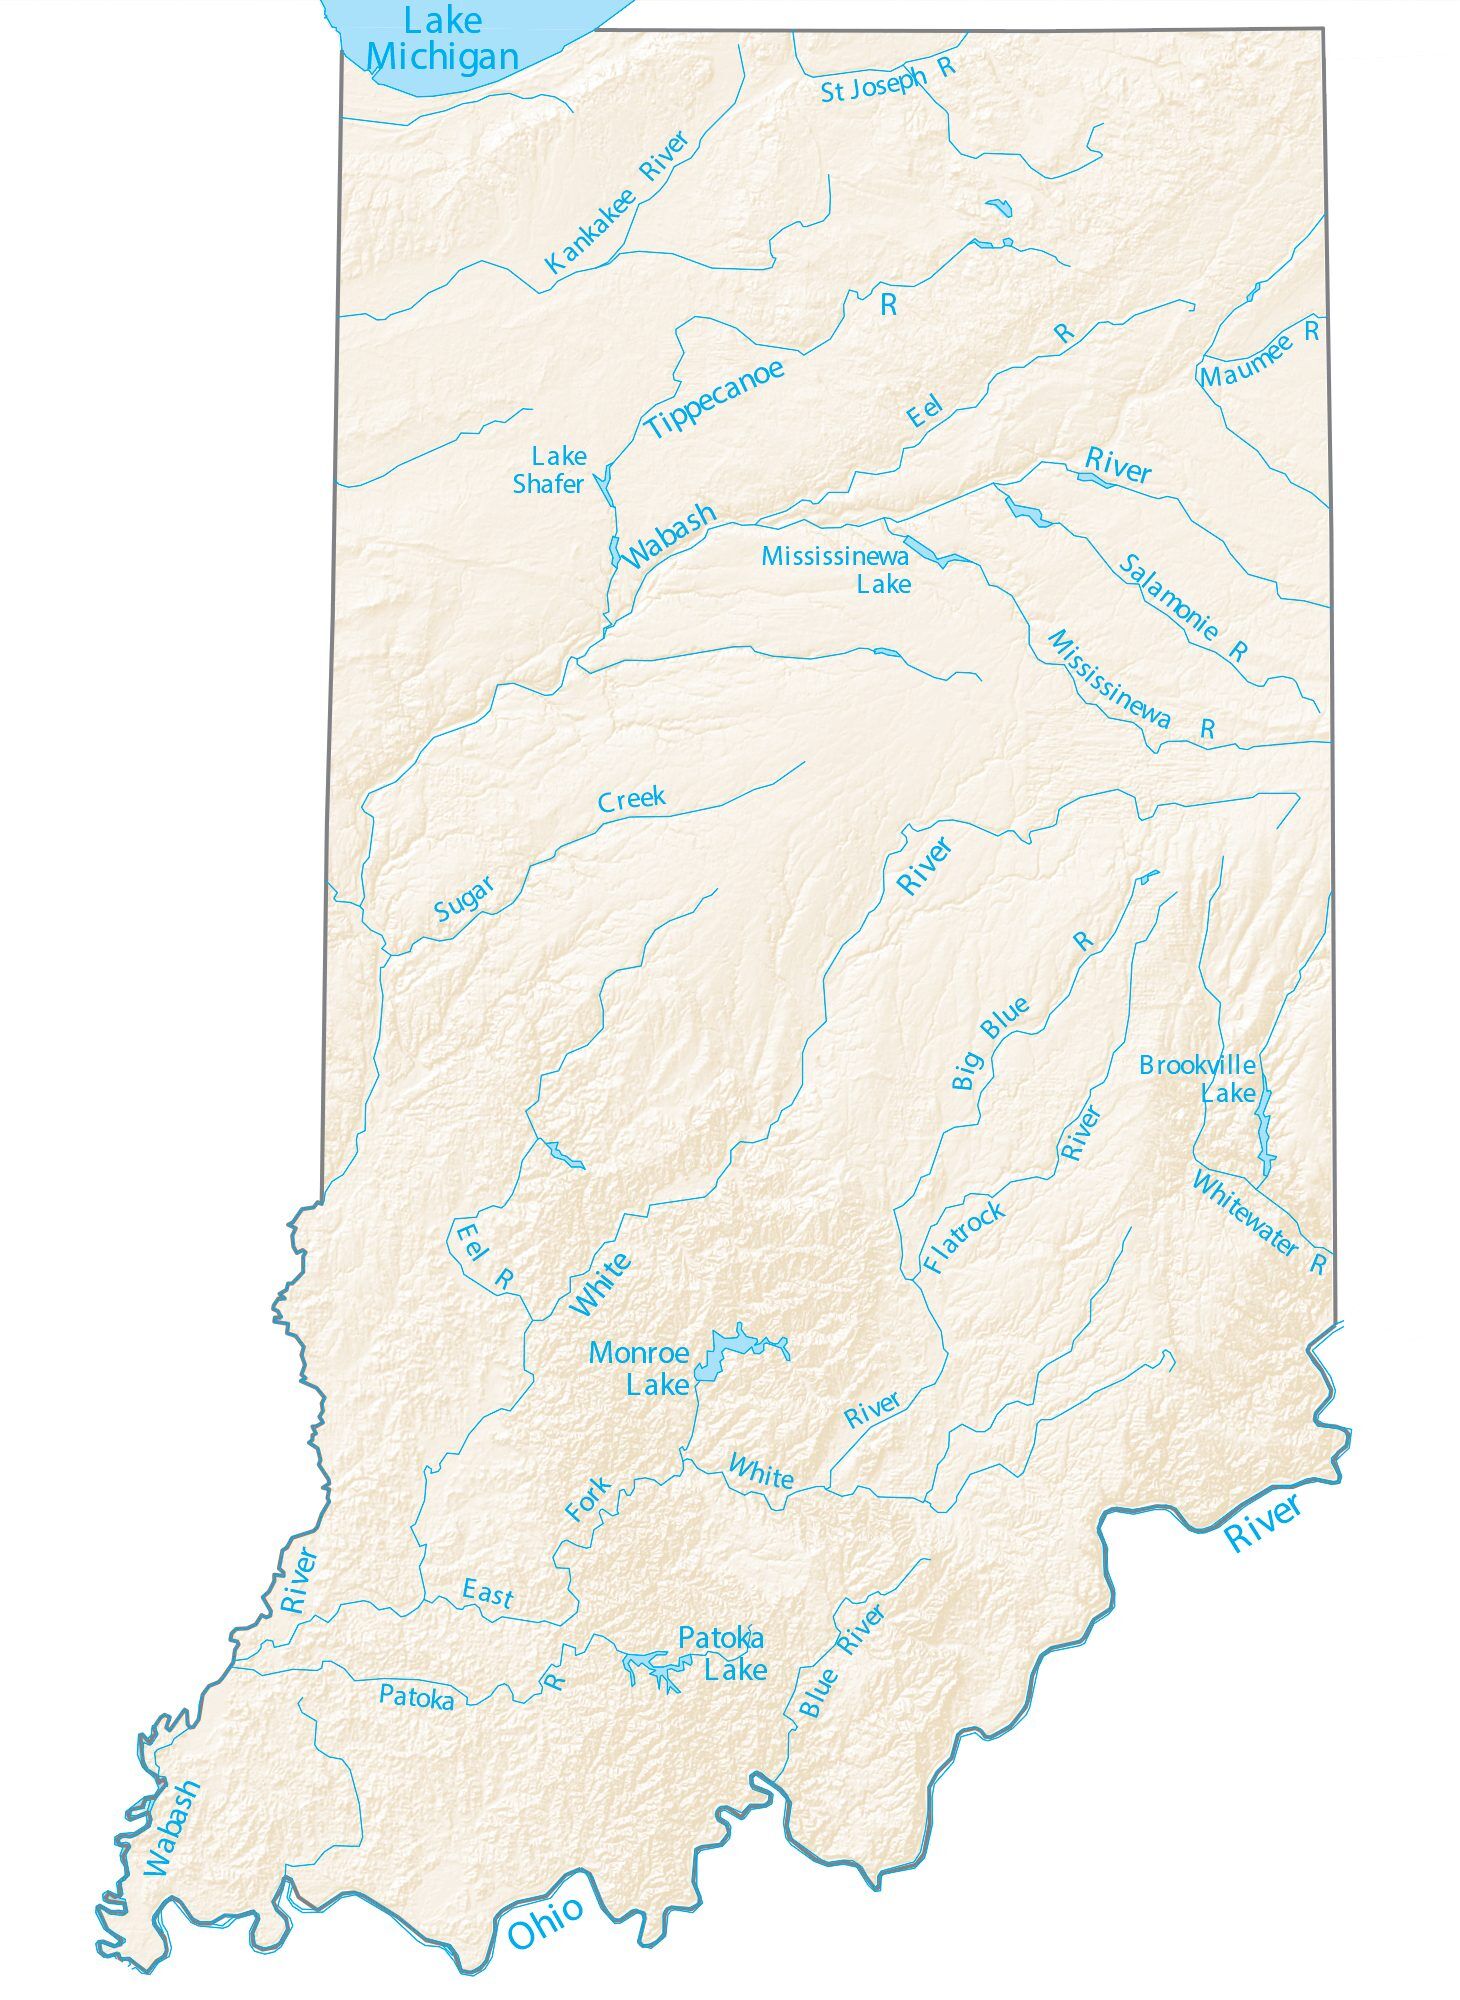 Indiana Lakes and Rivers Map - GIS Geography